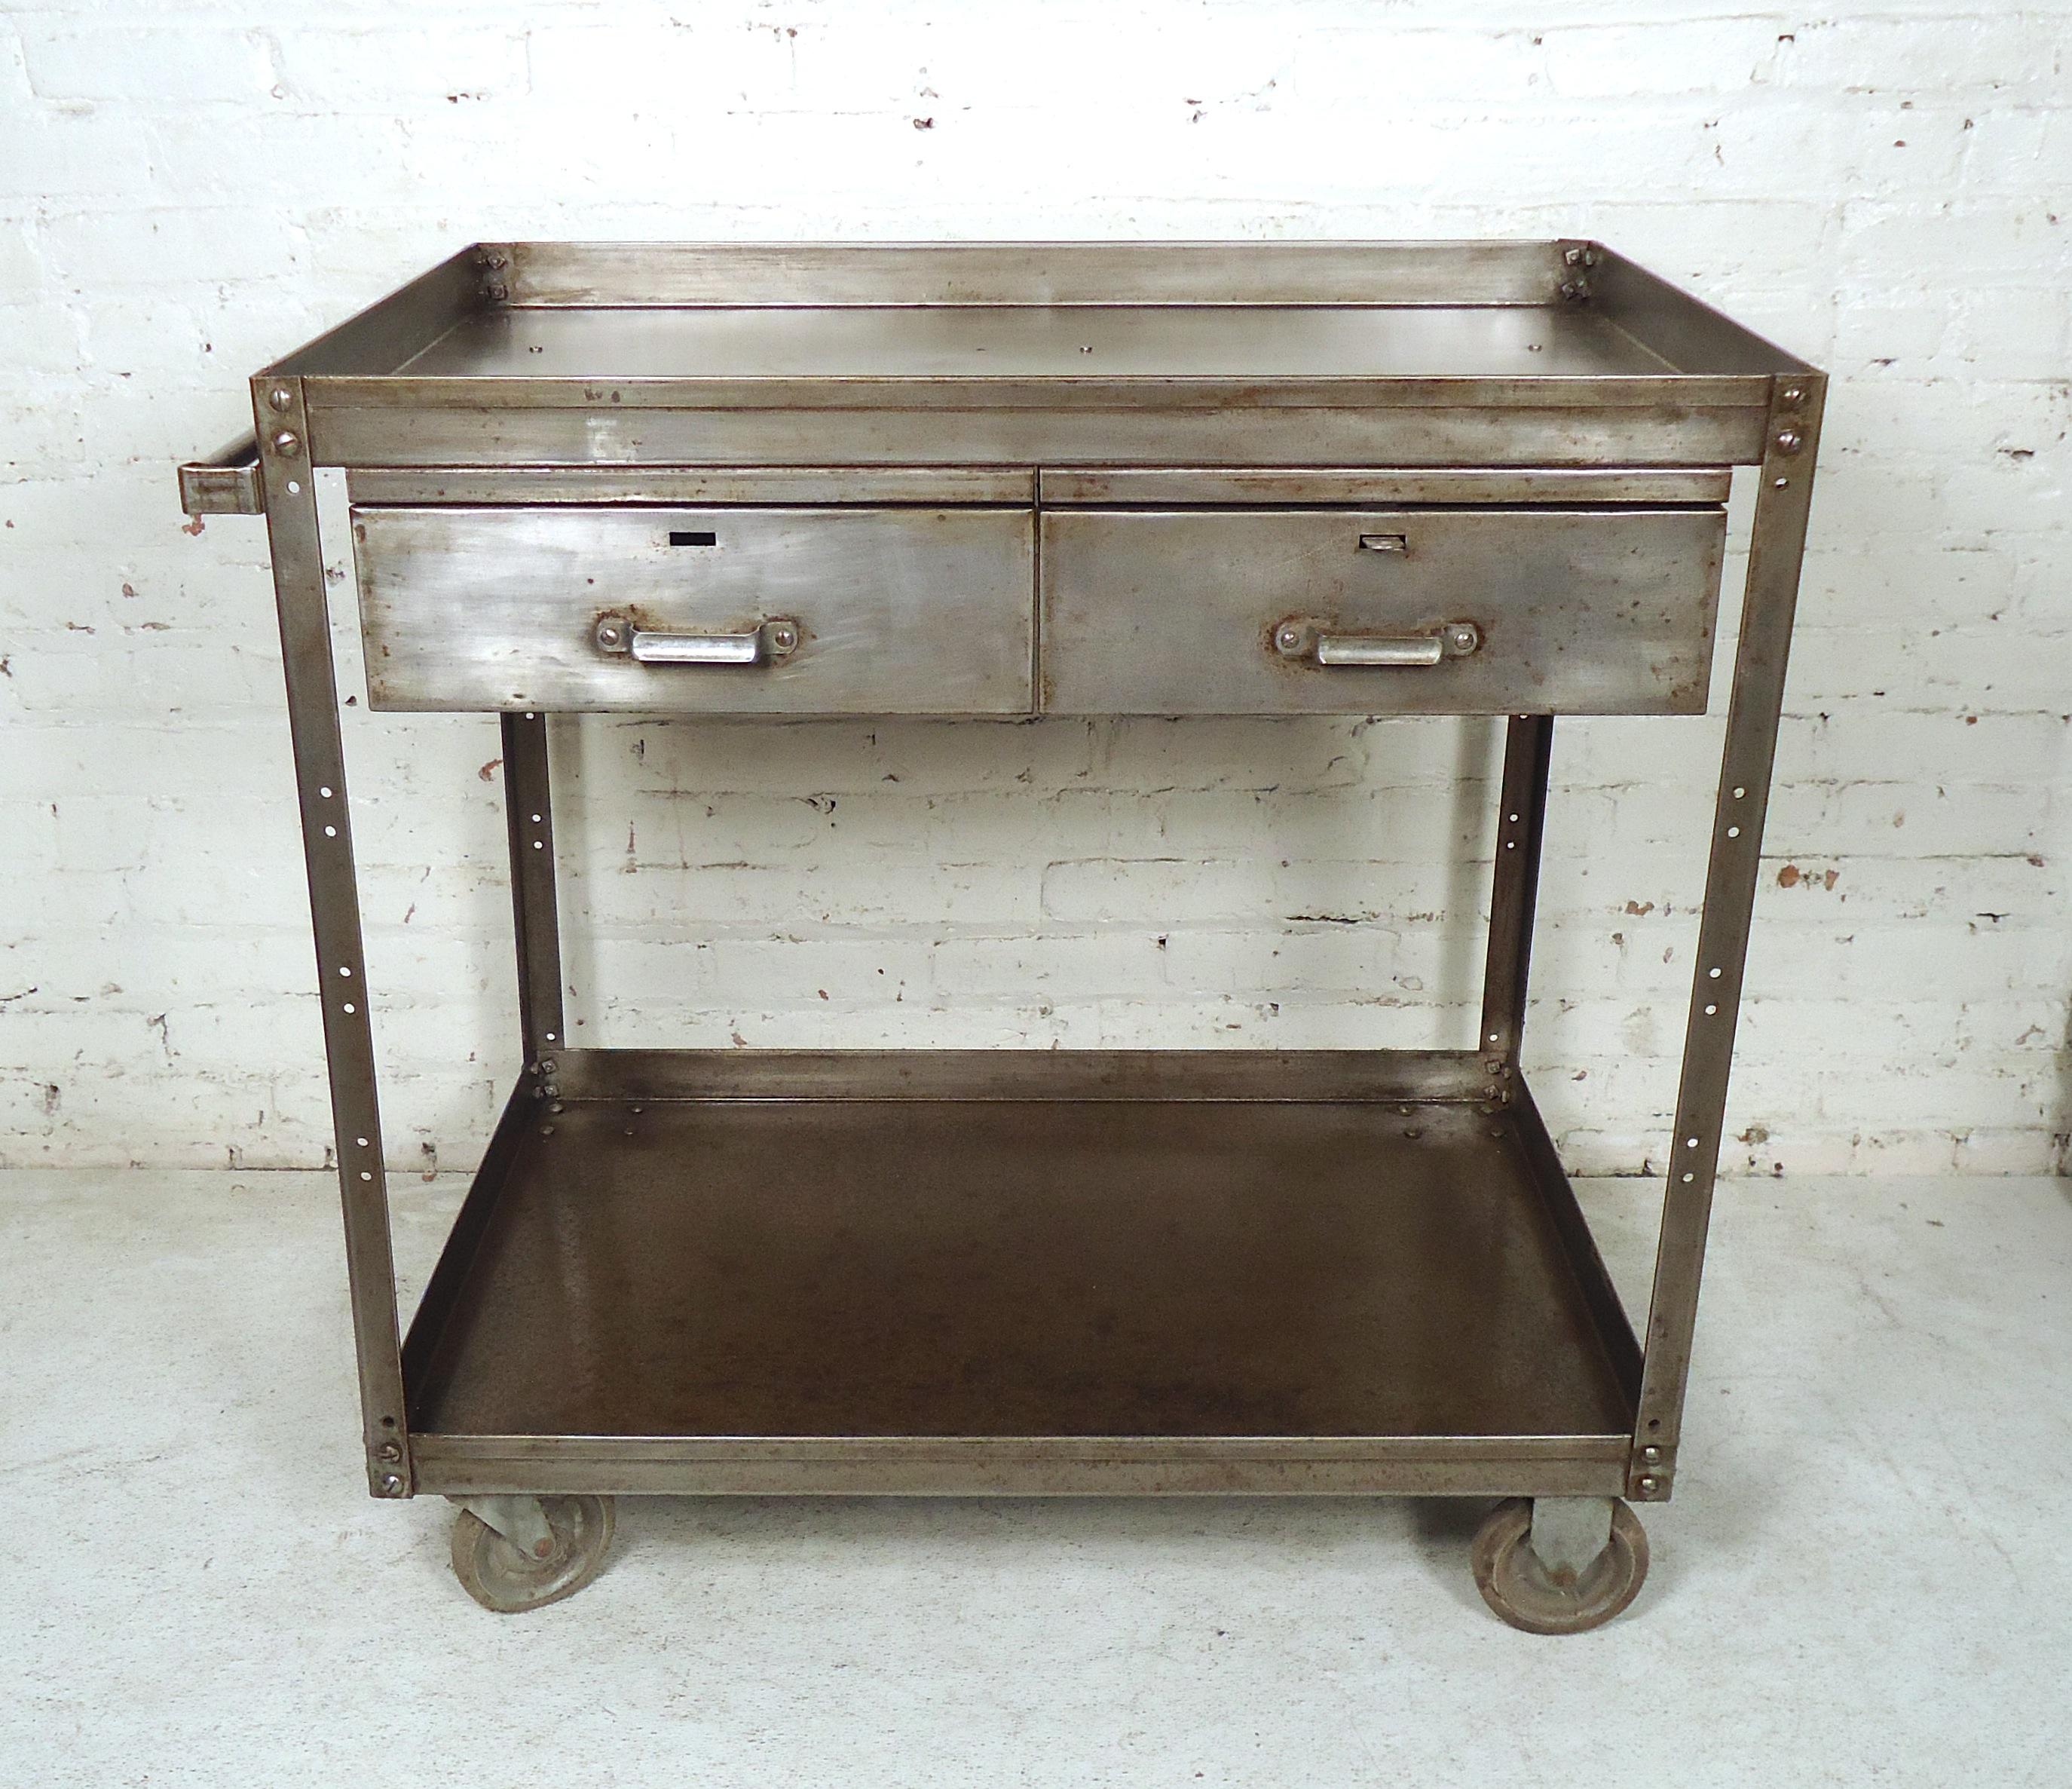 Great industrial two tier metal cart on wheels featured with two drawers.
(Please confirm item location NY or NJ with dealer.)